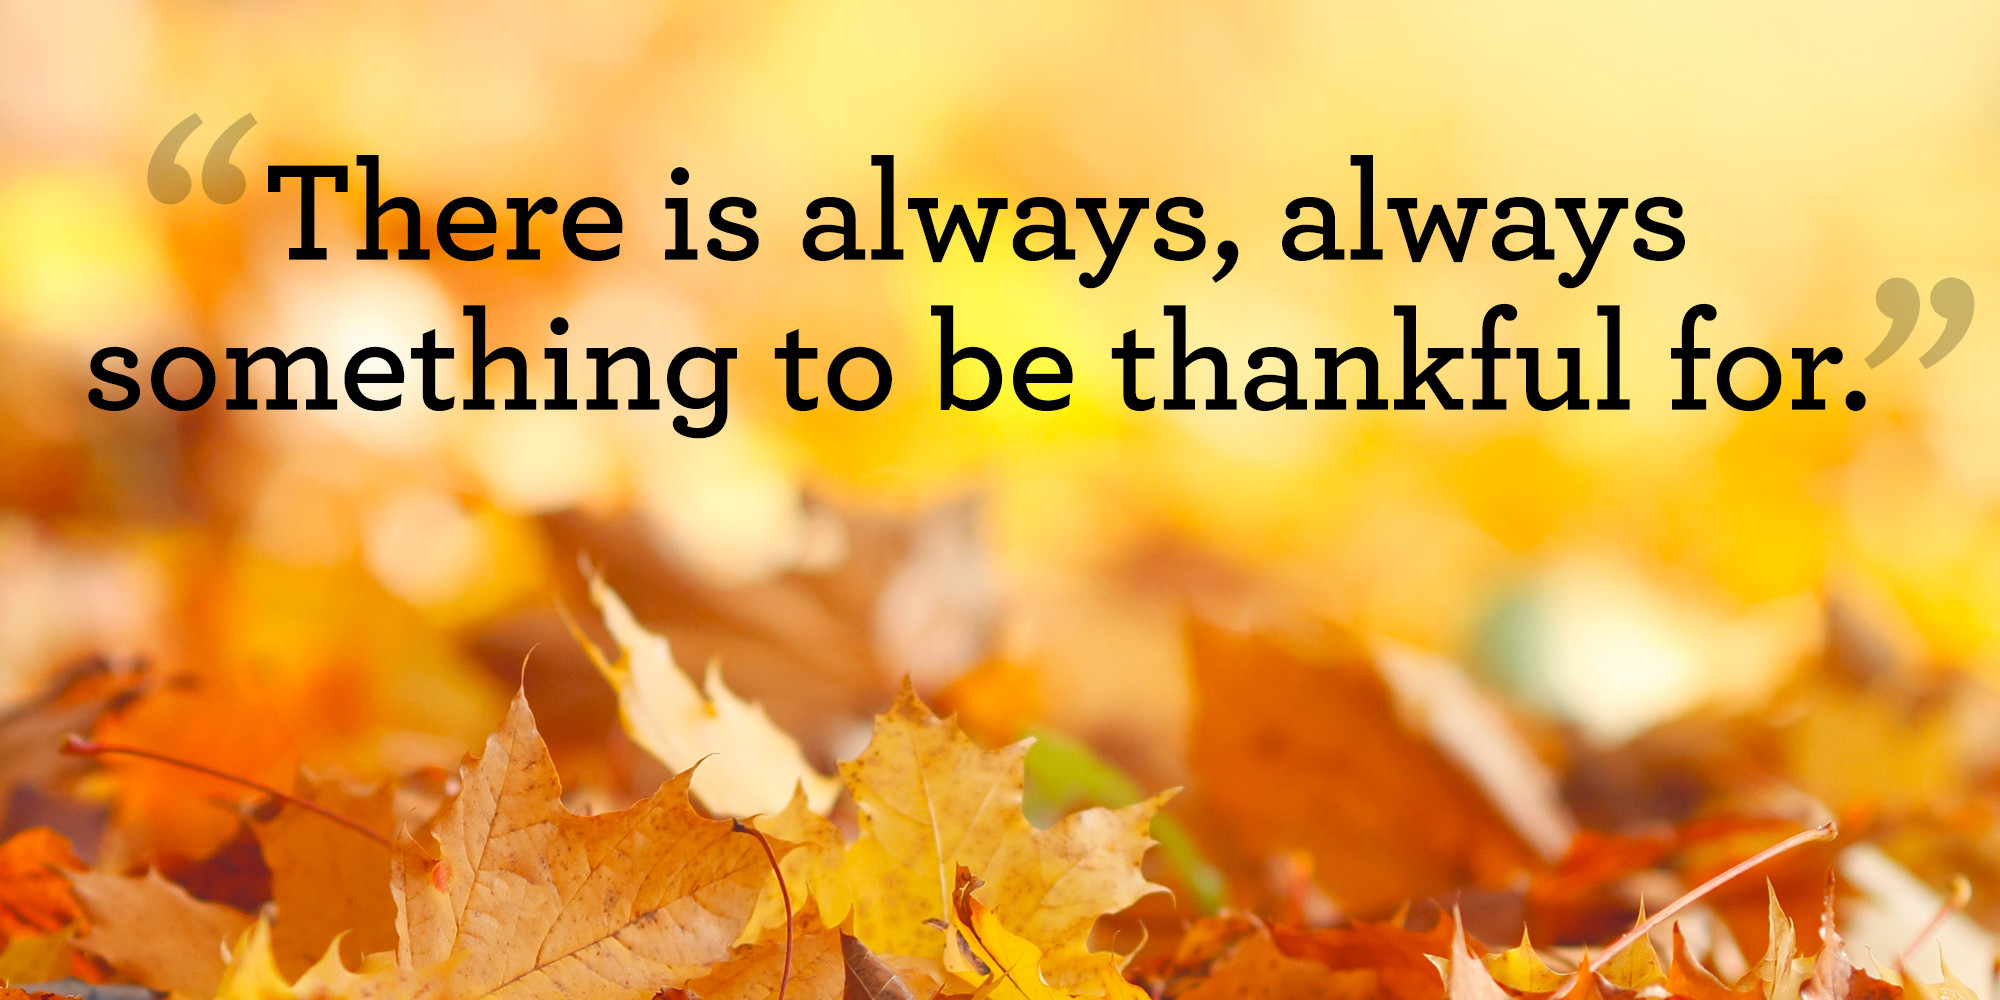 Quote Of Thanksgiving
 10 Best Thanksgiving Quotes Meaningful Thanksgiving Sayings